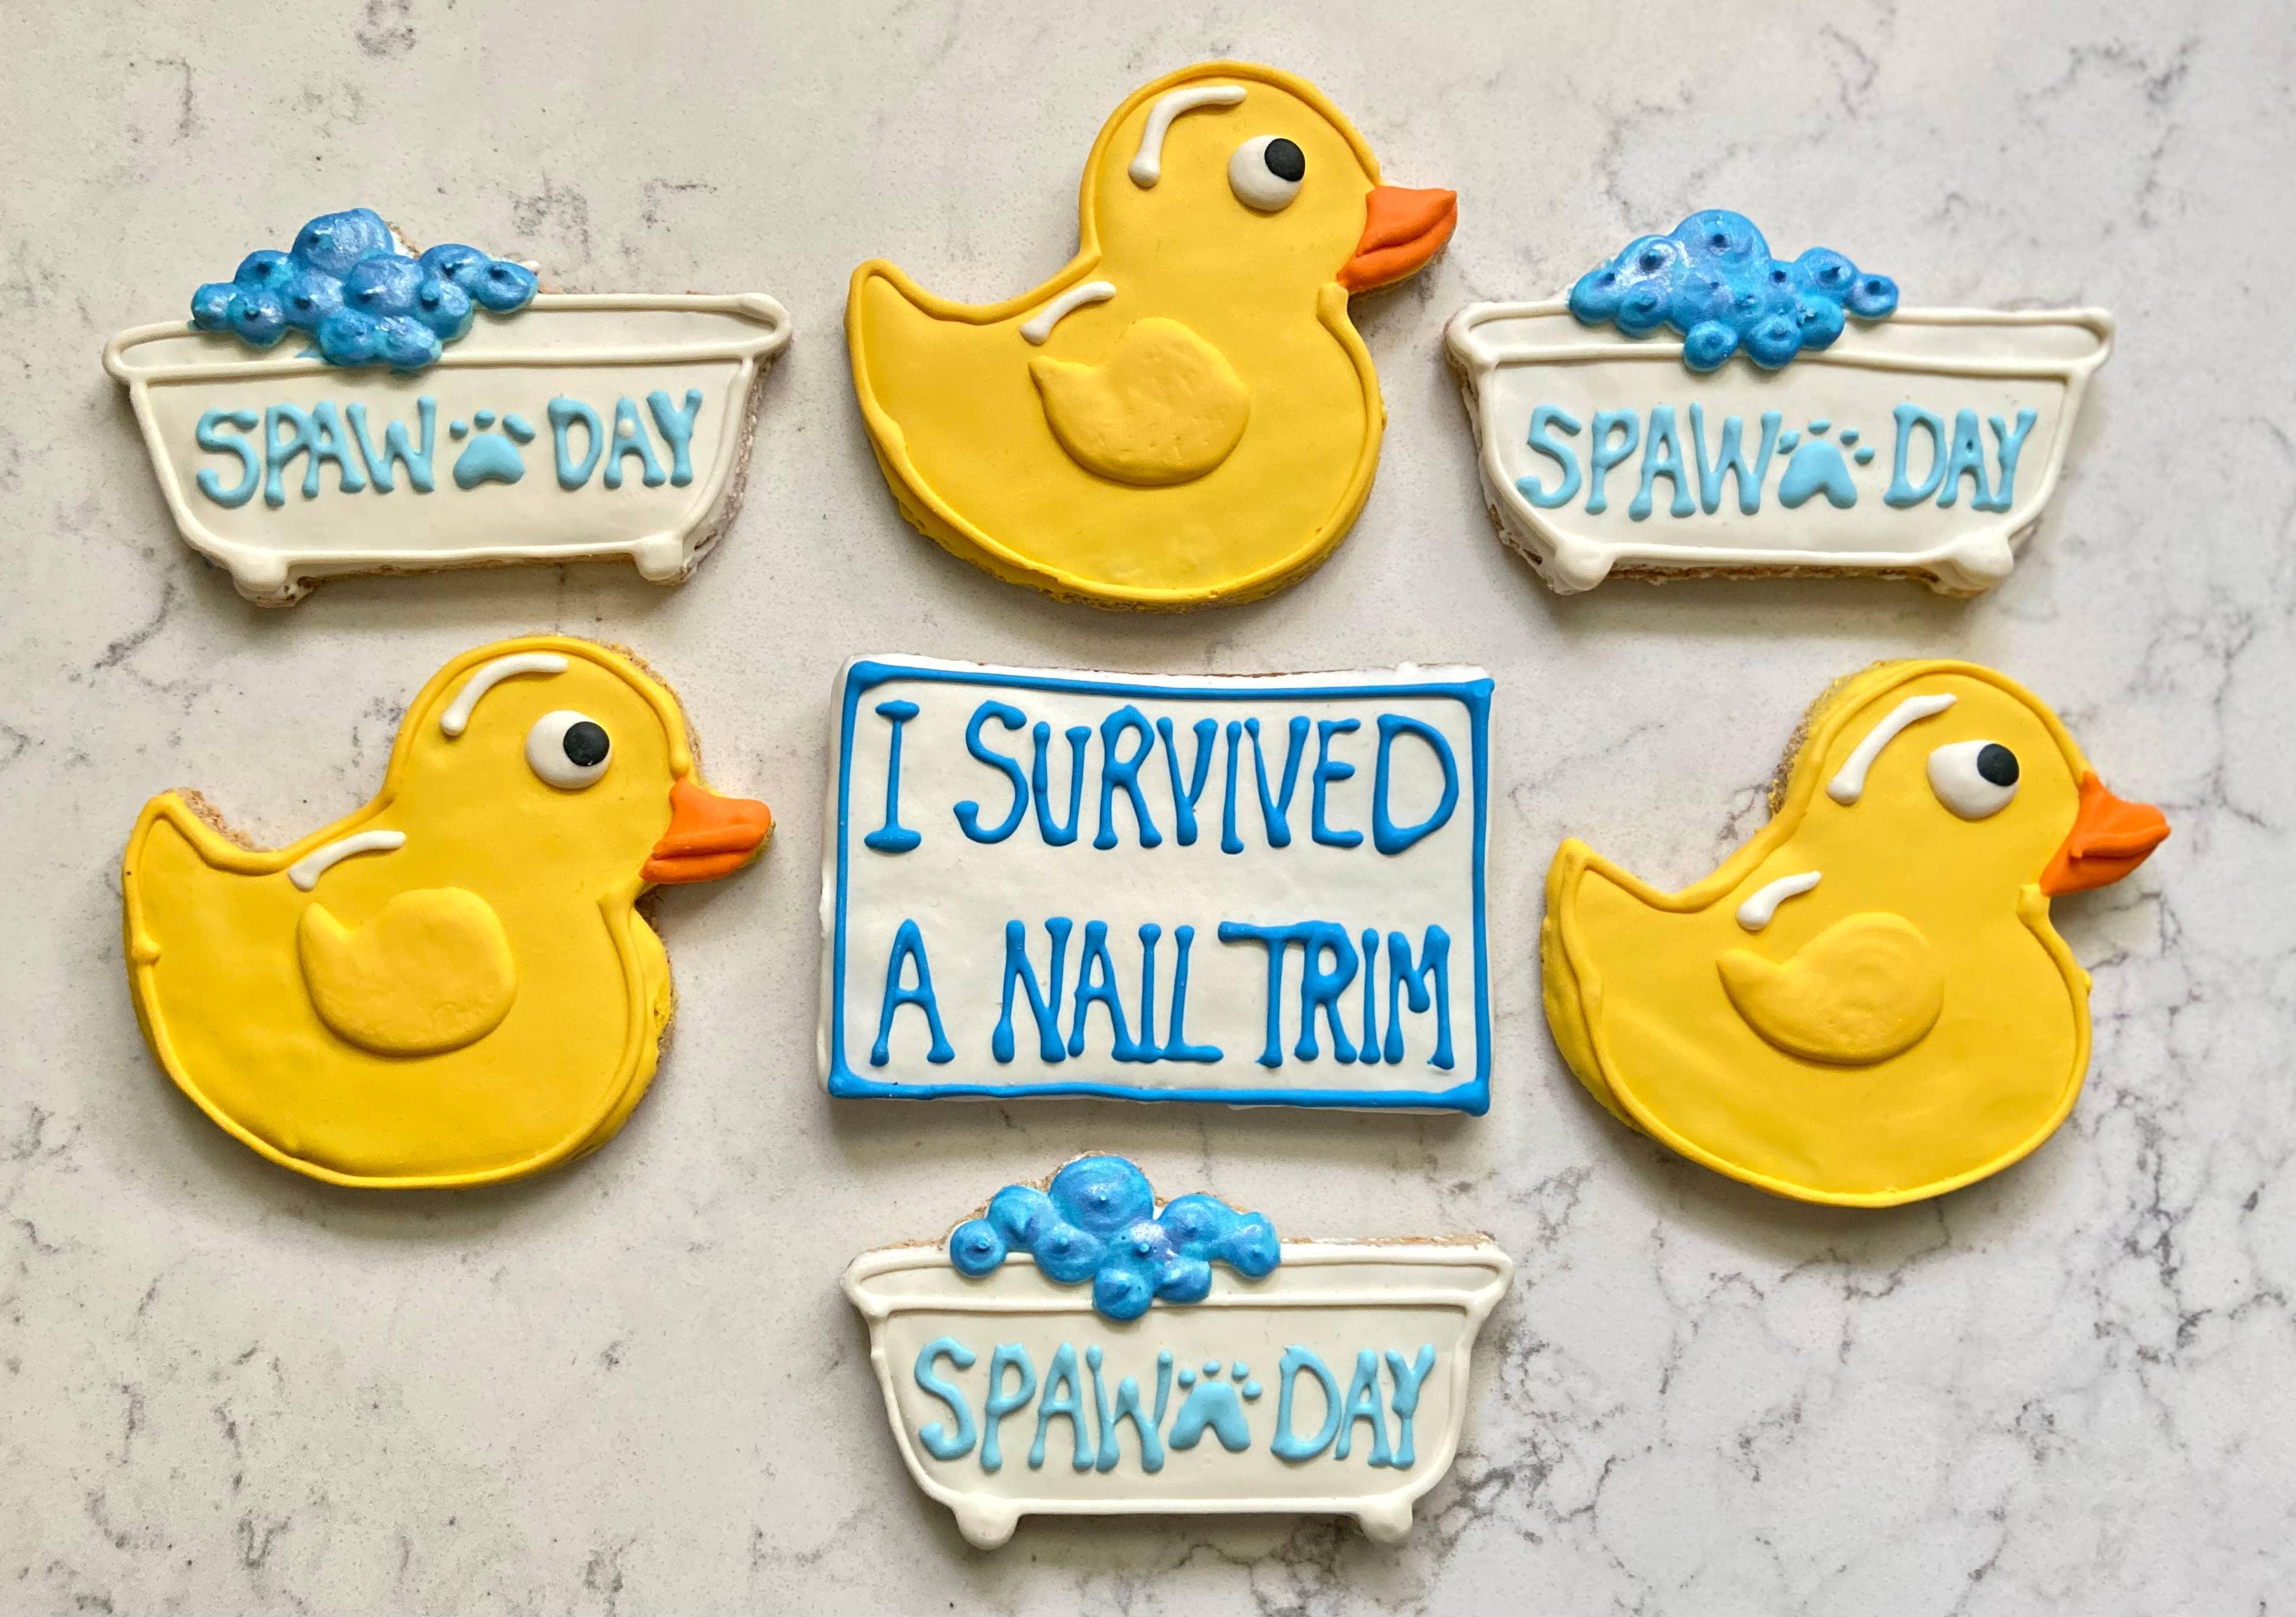 Spaw Day Cookies: I Survived a Nail Trim Cookie - Rocky & Maggie's Pet Boutique and Salon